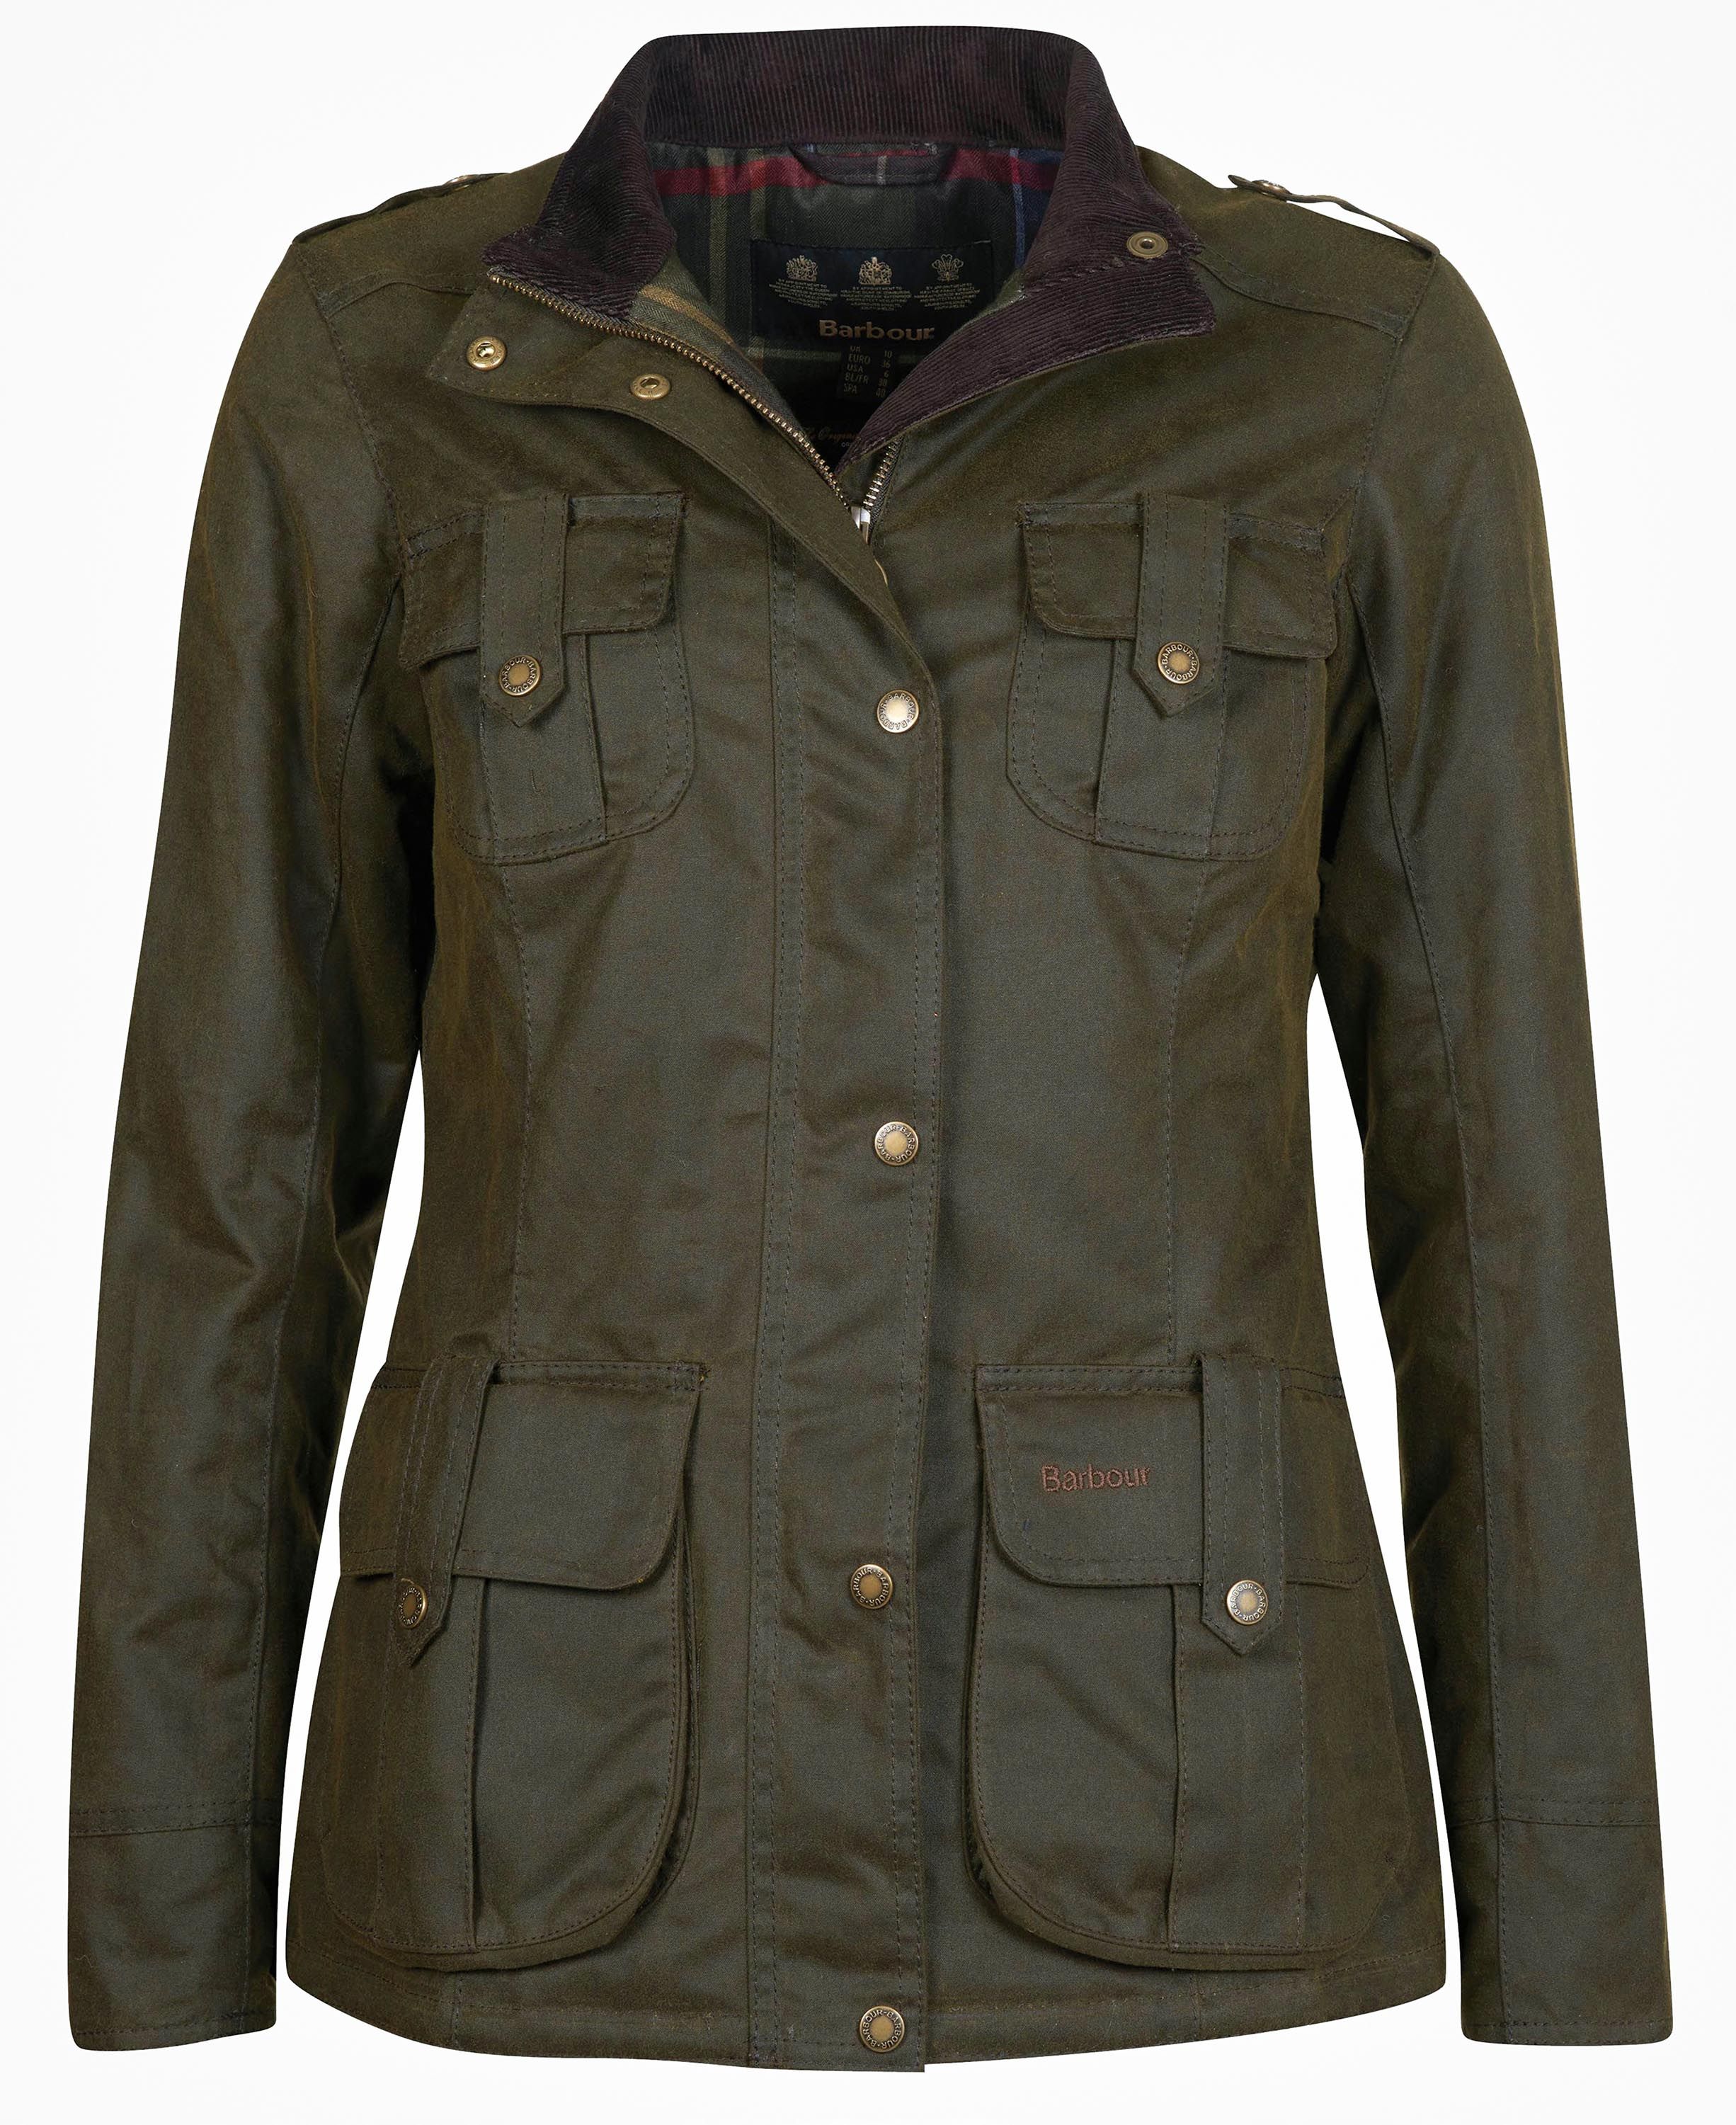 Barbour Winter Defence Waxed Cotton Jacket - Olive SeriousCountrySports.com